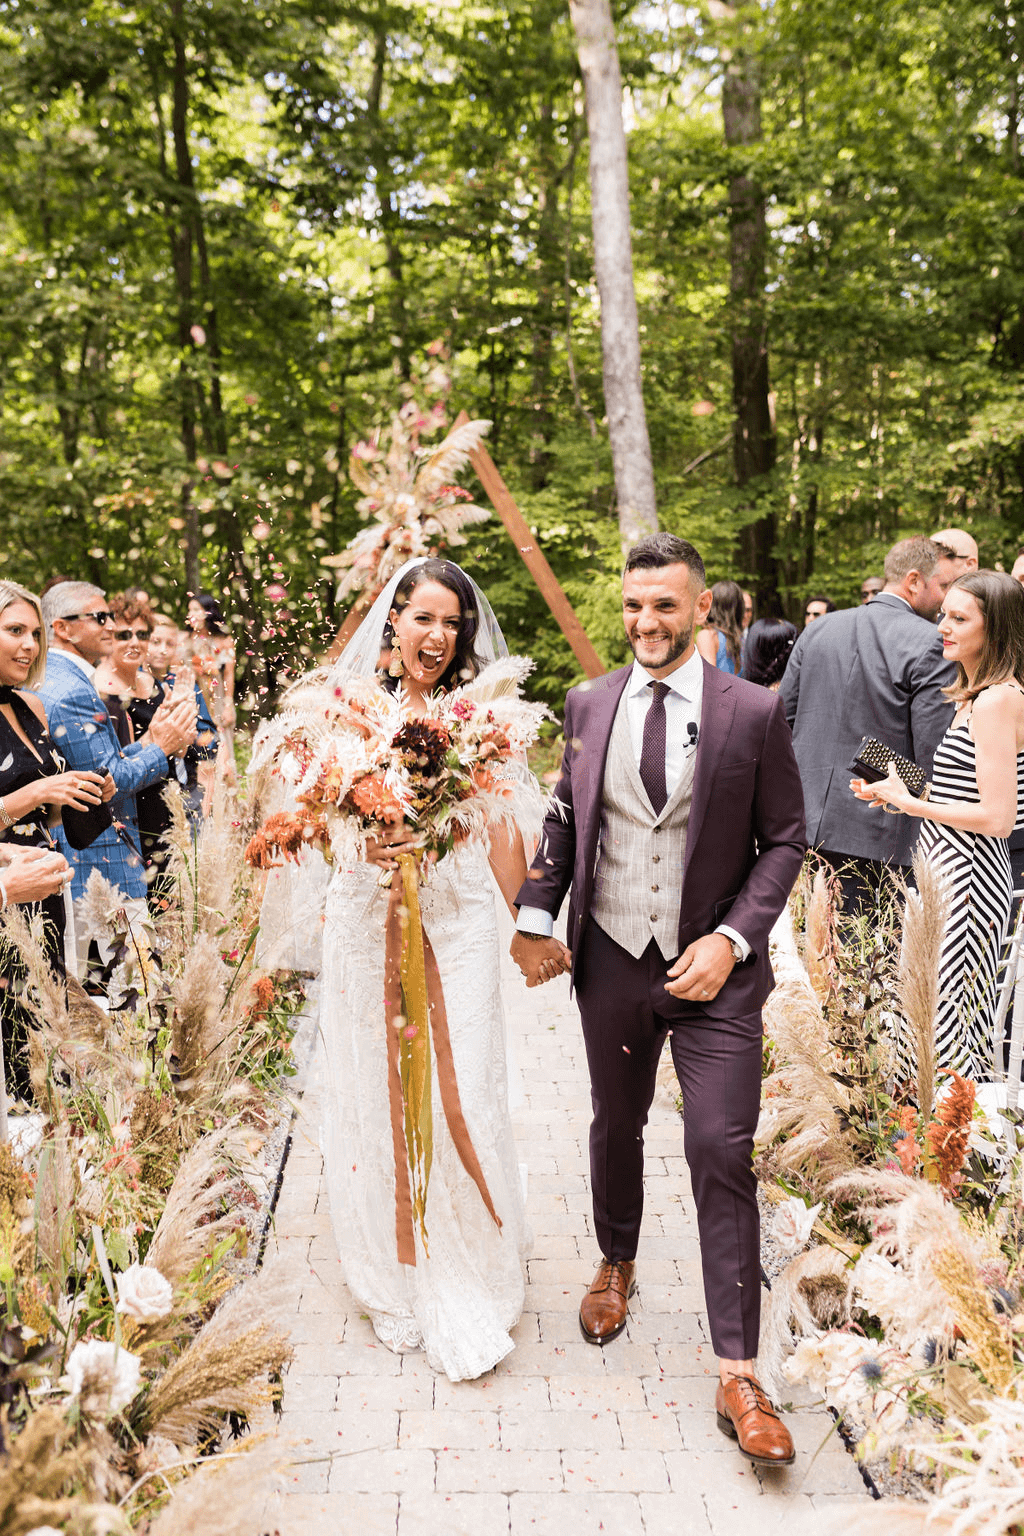 Bride and groom walk down the isle hand in hand as guest throw confetti